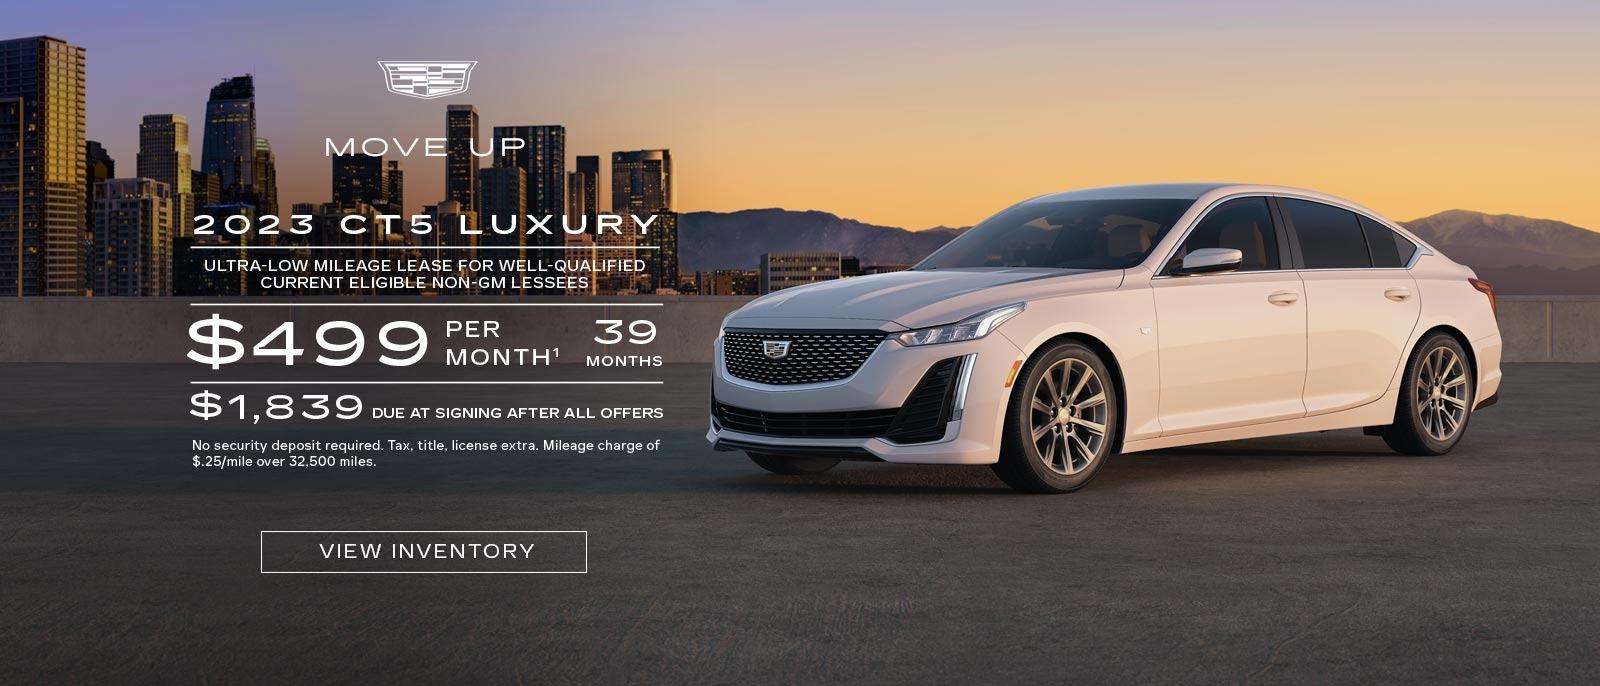 ULTRA-LOW MILEAGE LEASE FOR WELL-QUALIFIED CURRENT ELIGIBLE CADILLAC LESSEES
$499 PER MONTH¹ 39 MONTHS
$1,839 DUE AT SIGNING AFTER ALL OFFERS
No security deposit required. Tax, title, license extra. Mileage charge of $.25/mile over 30,000 miles.